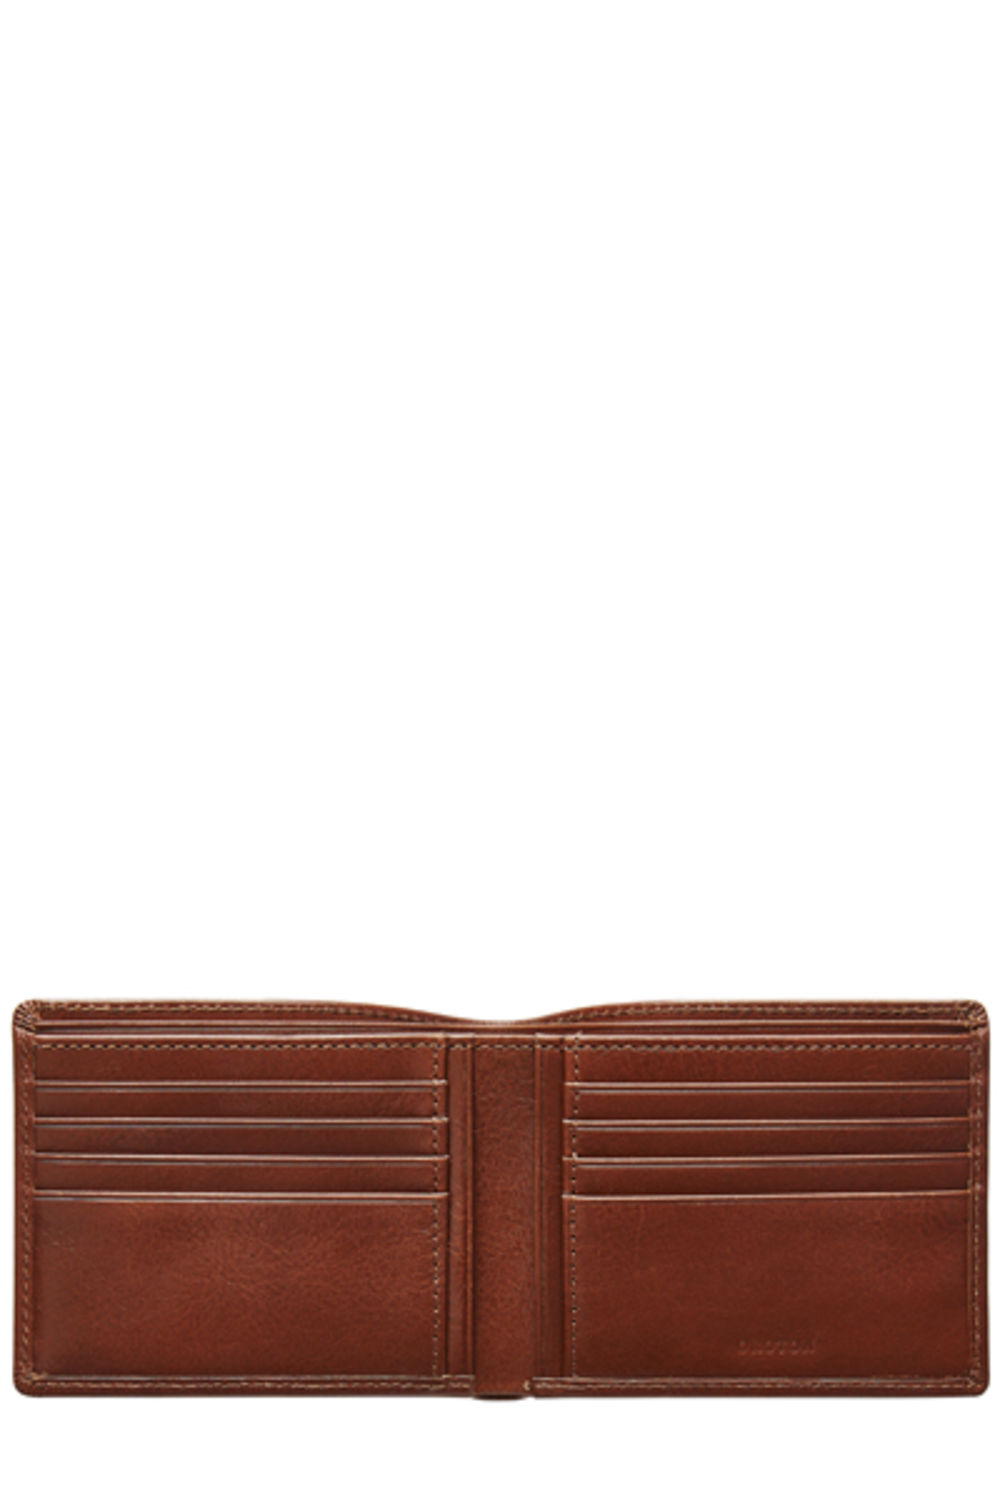 Men's Leather Wallets, Card Holders & Money Clips | Oroton Shop